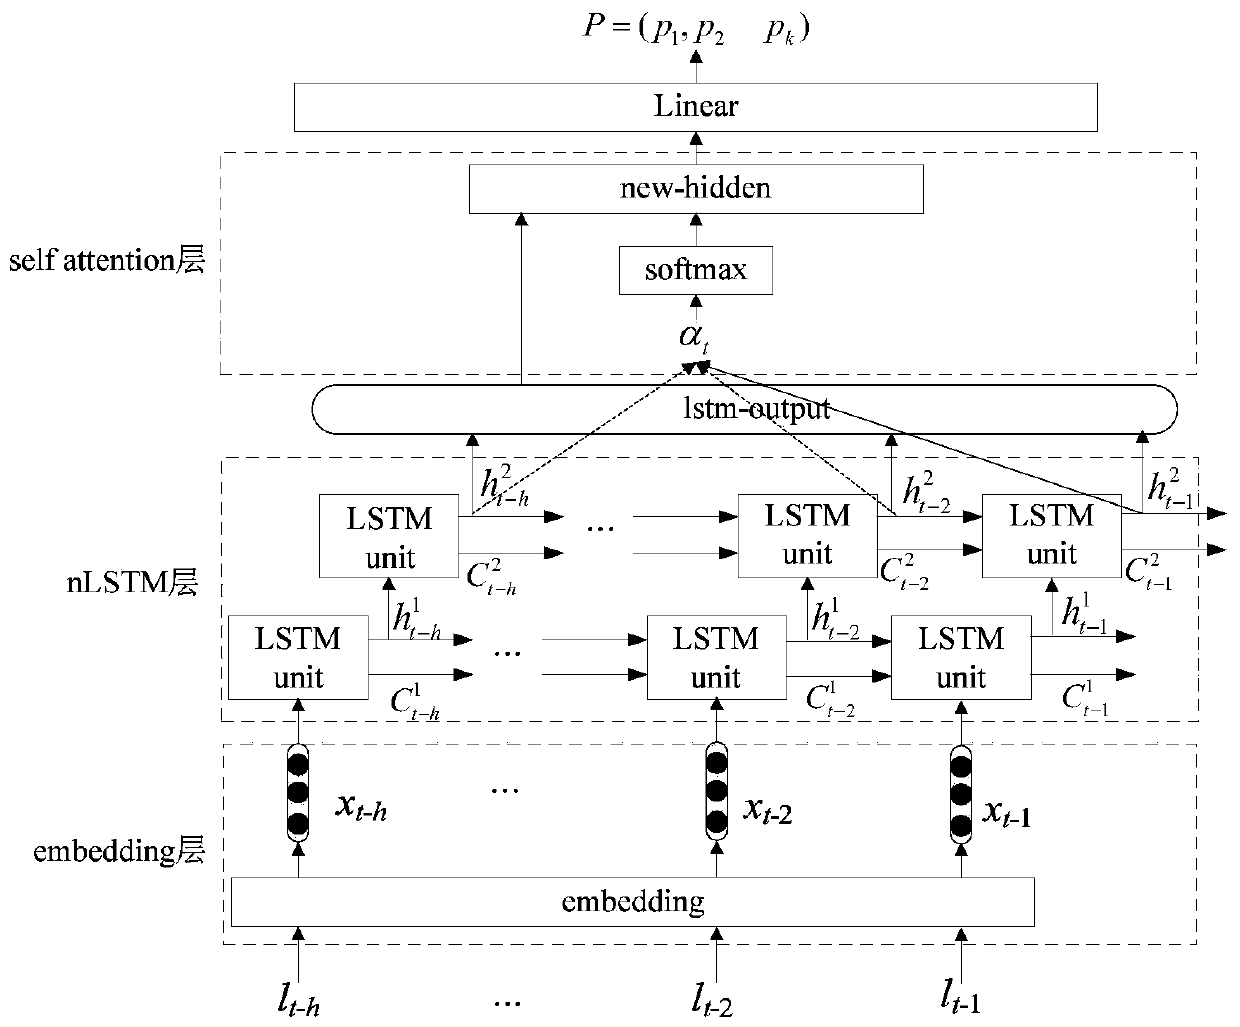 Log sequence anomaly detection framework based on nLSTM (Non-Log Sequence Transfer Module)-self attention